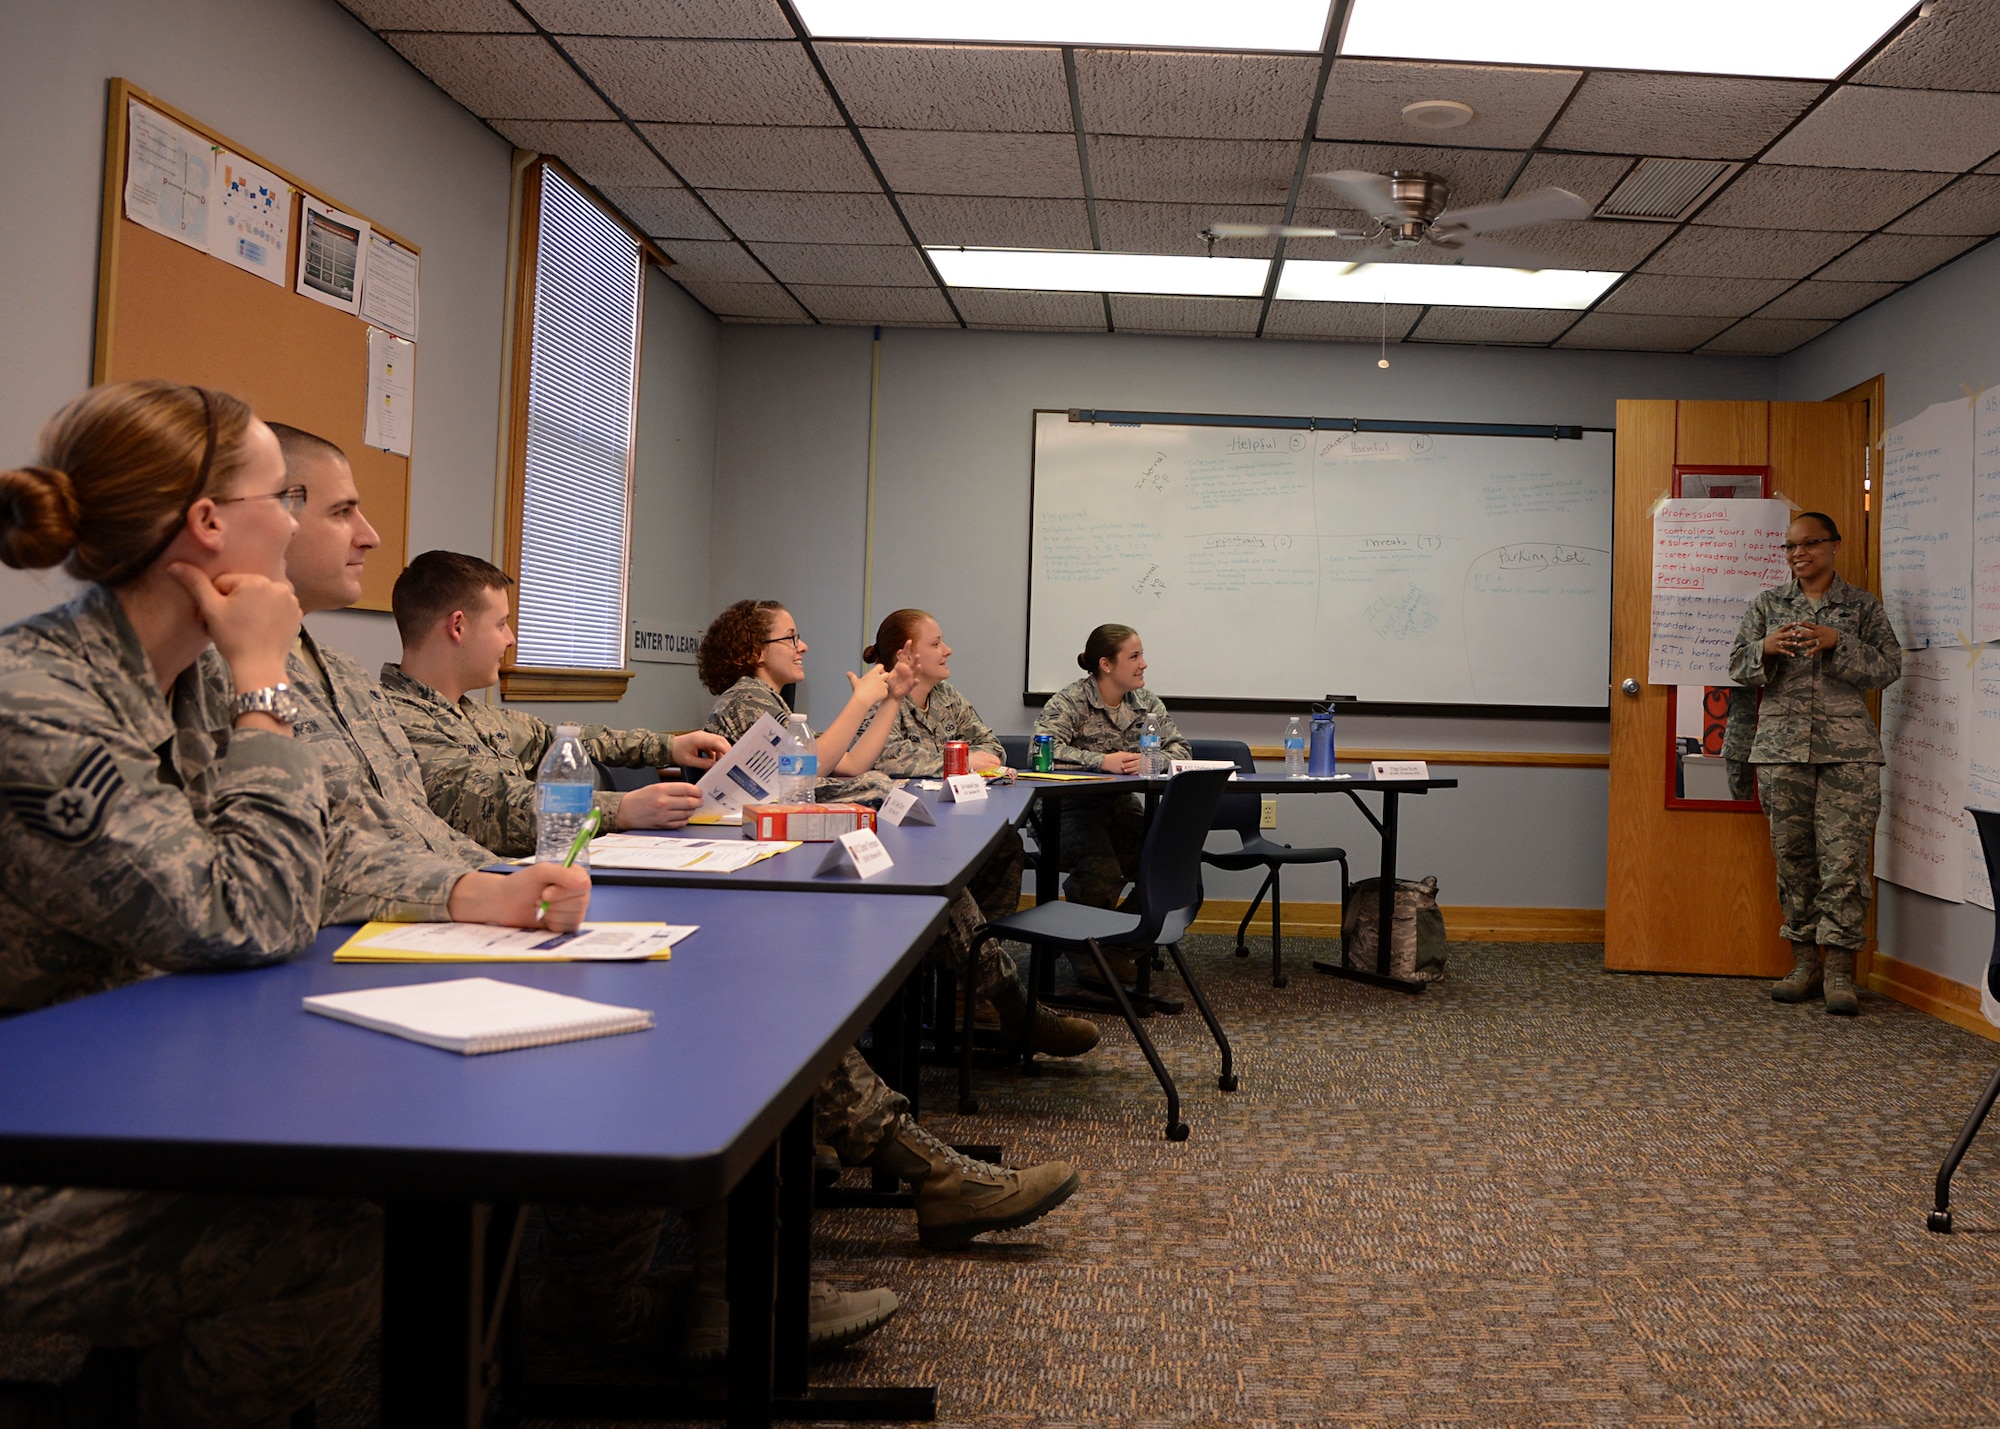 Tech. Sgt. Gina Scott, 90th Missile Wing Security Forces Squadron NCO in-charge of resource protection, F.E. Warren Air Force Base, Wyoming, discusses ways to help foster a more resilient Air Force with her team members on Barksdale Air Force Base, La., April 1, 2015. Around 20 Airmen from Air Force Global Strike Command, numbered air forces and wings, formed a Resiliency Tiger Team here. (U.S. Air Force photo/Senior Airman Joseph A. Pagán Jr.)